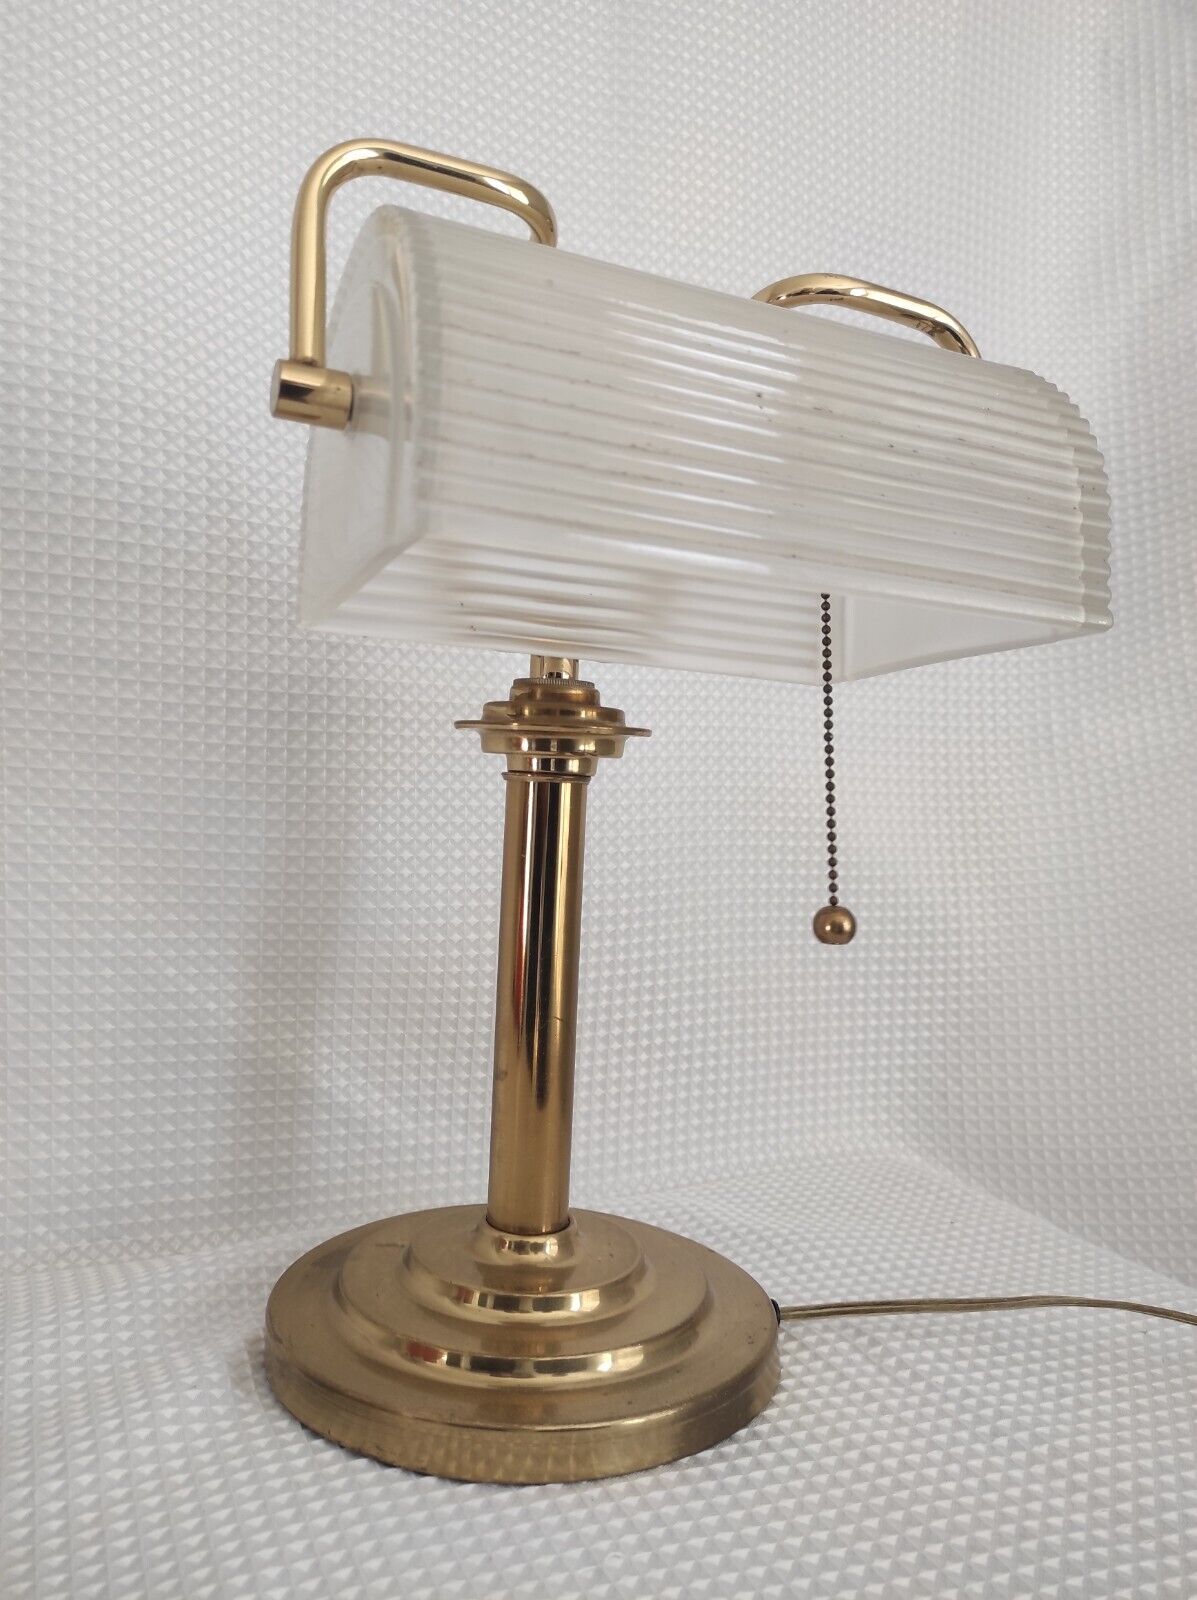 Vintage Bankers Lamp with Ribbed Glass and Brass Plate, Good Condition 80s Sale